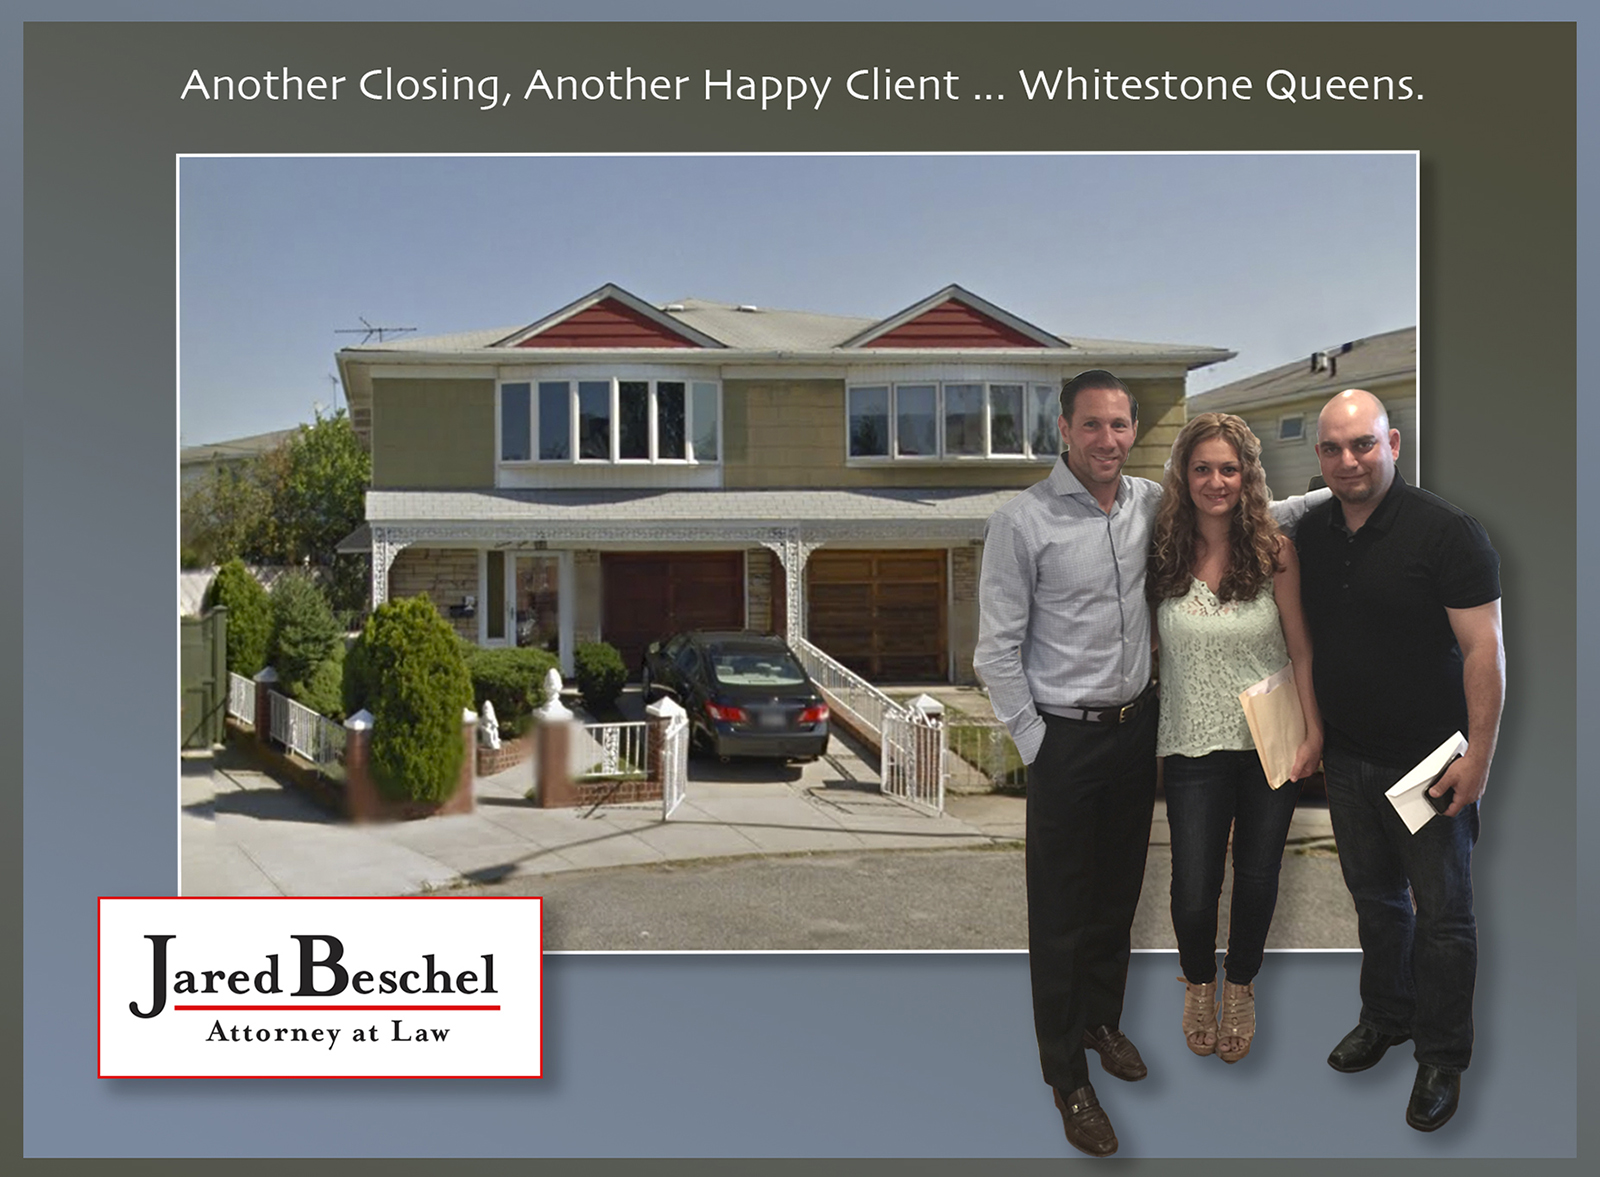 Another Closing, Another Happy Client ... Whitestone Queens